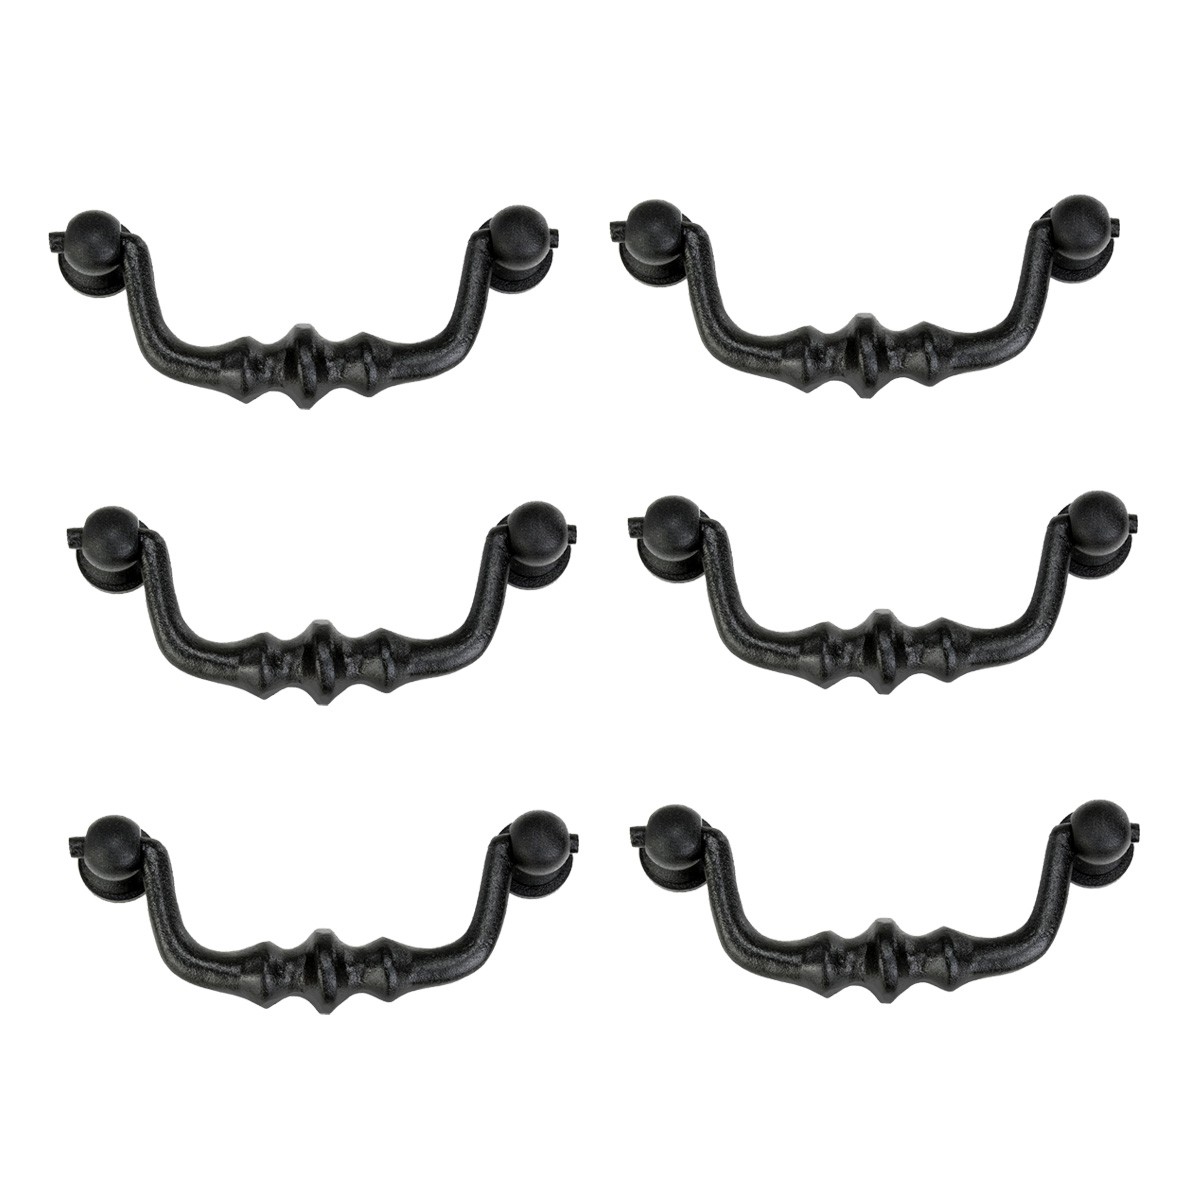 Wrought Iron Old World Drawer Bail Pull 4 1 2 Inch Set Of 6